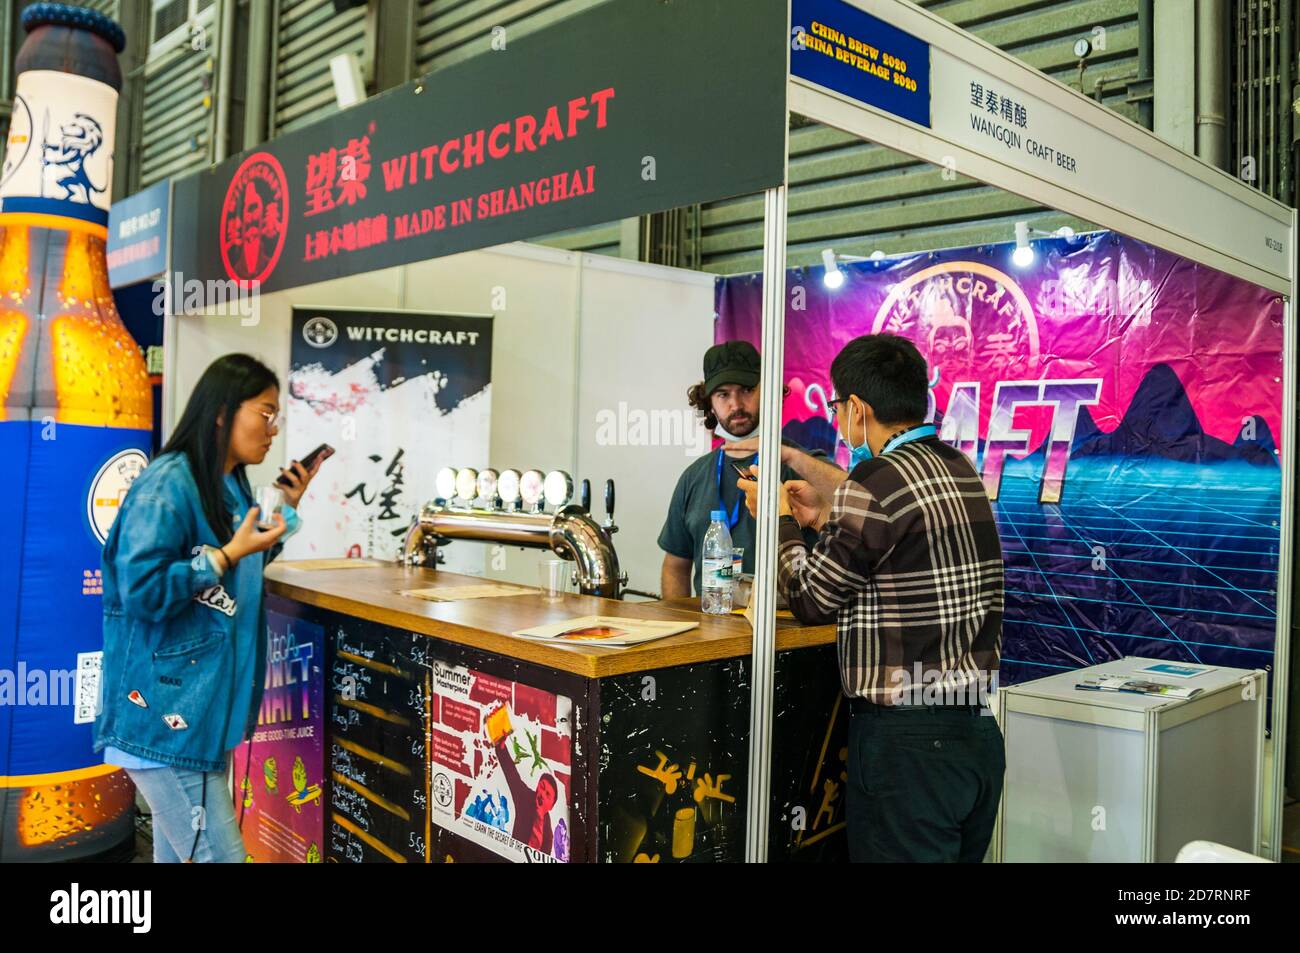 Witchcraft Brewing stand at the China Brew 2020 exhibition at the Shanghai New International Exhibition Center. Stock Photo